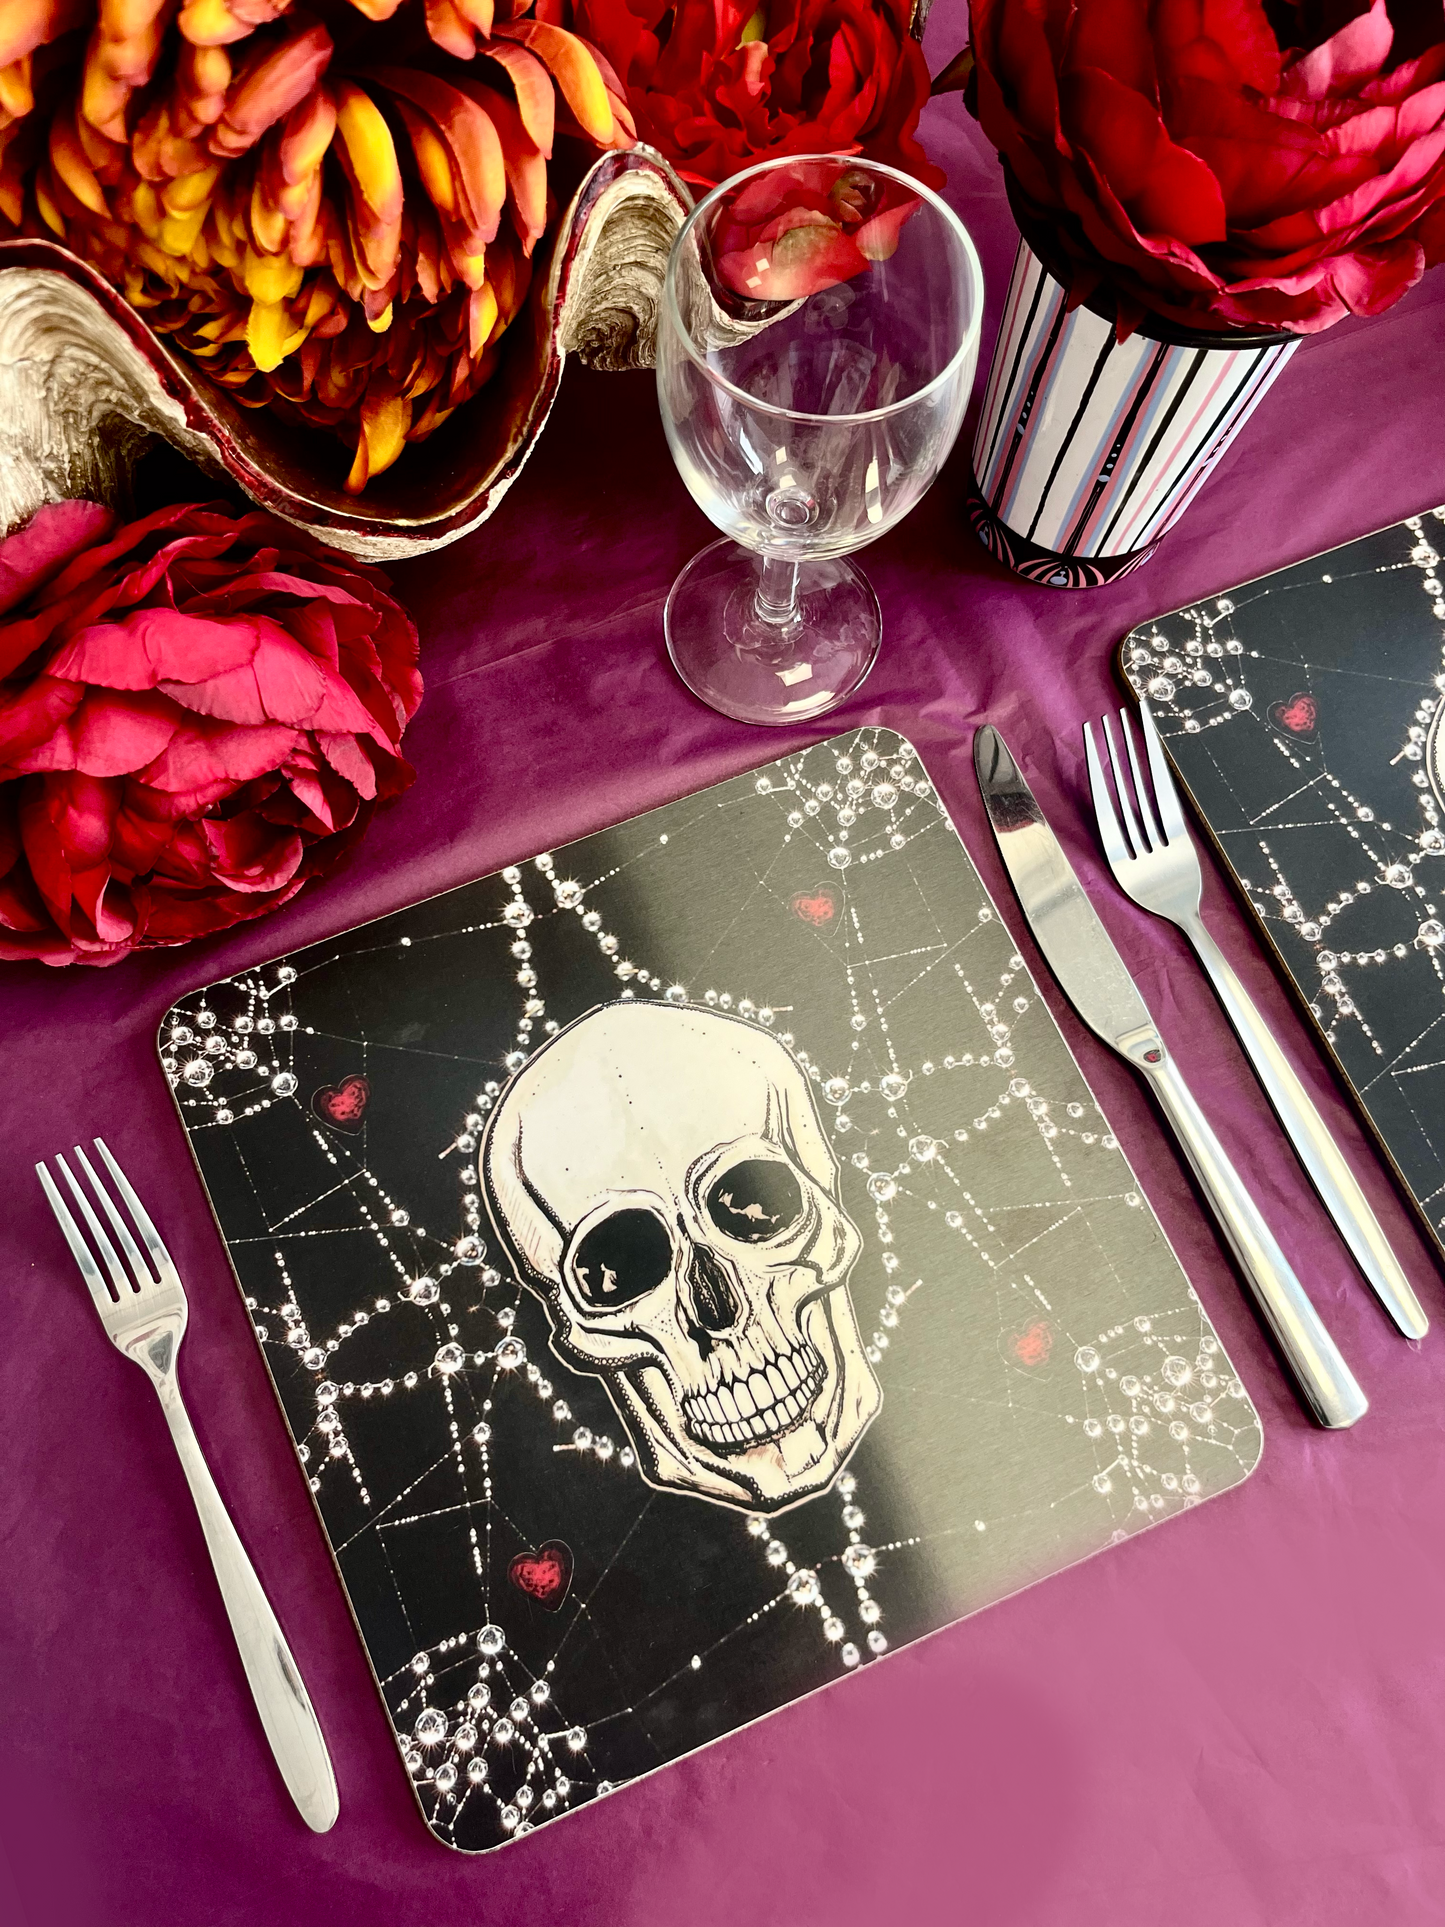 * Skull Love Square Placemat